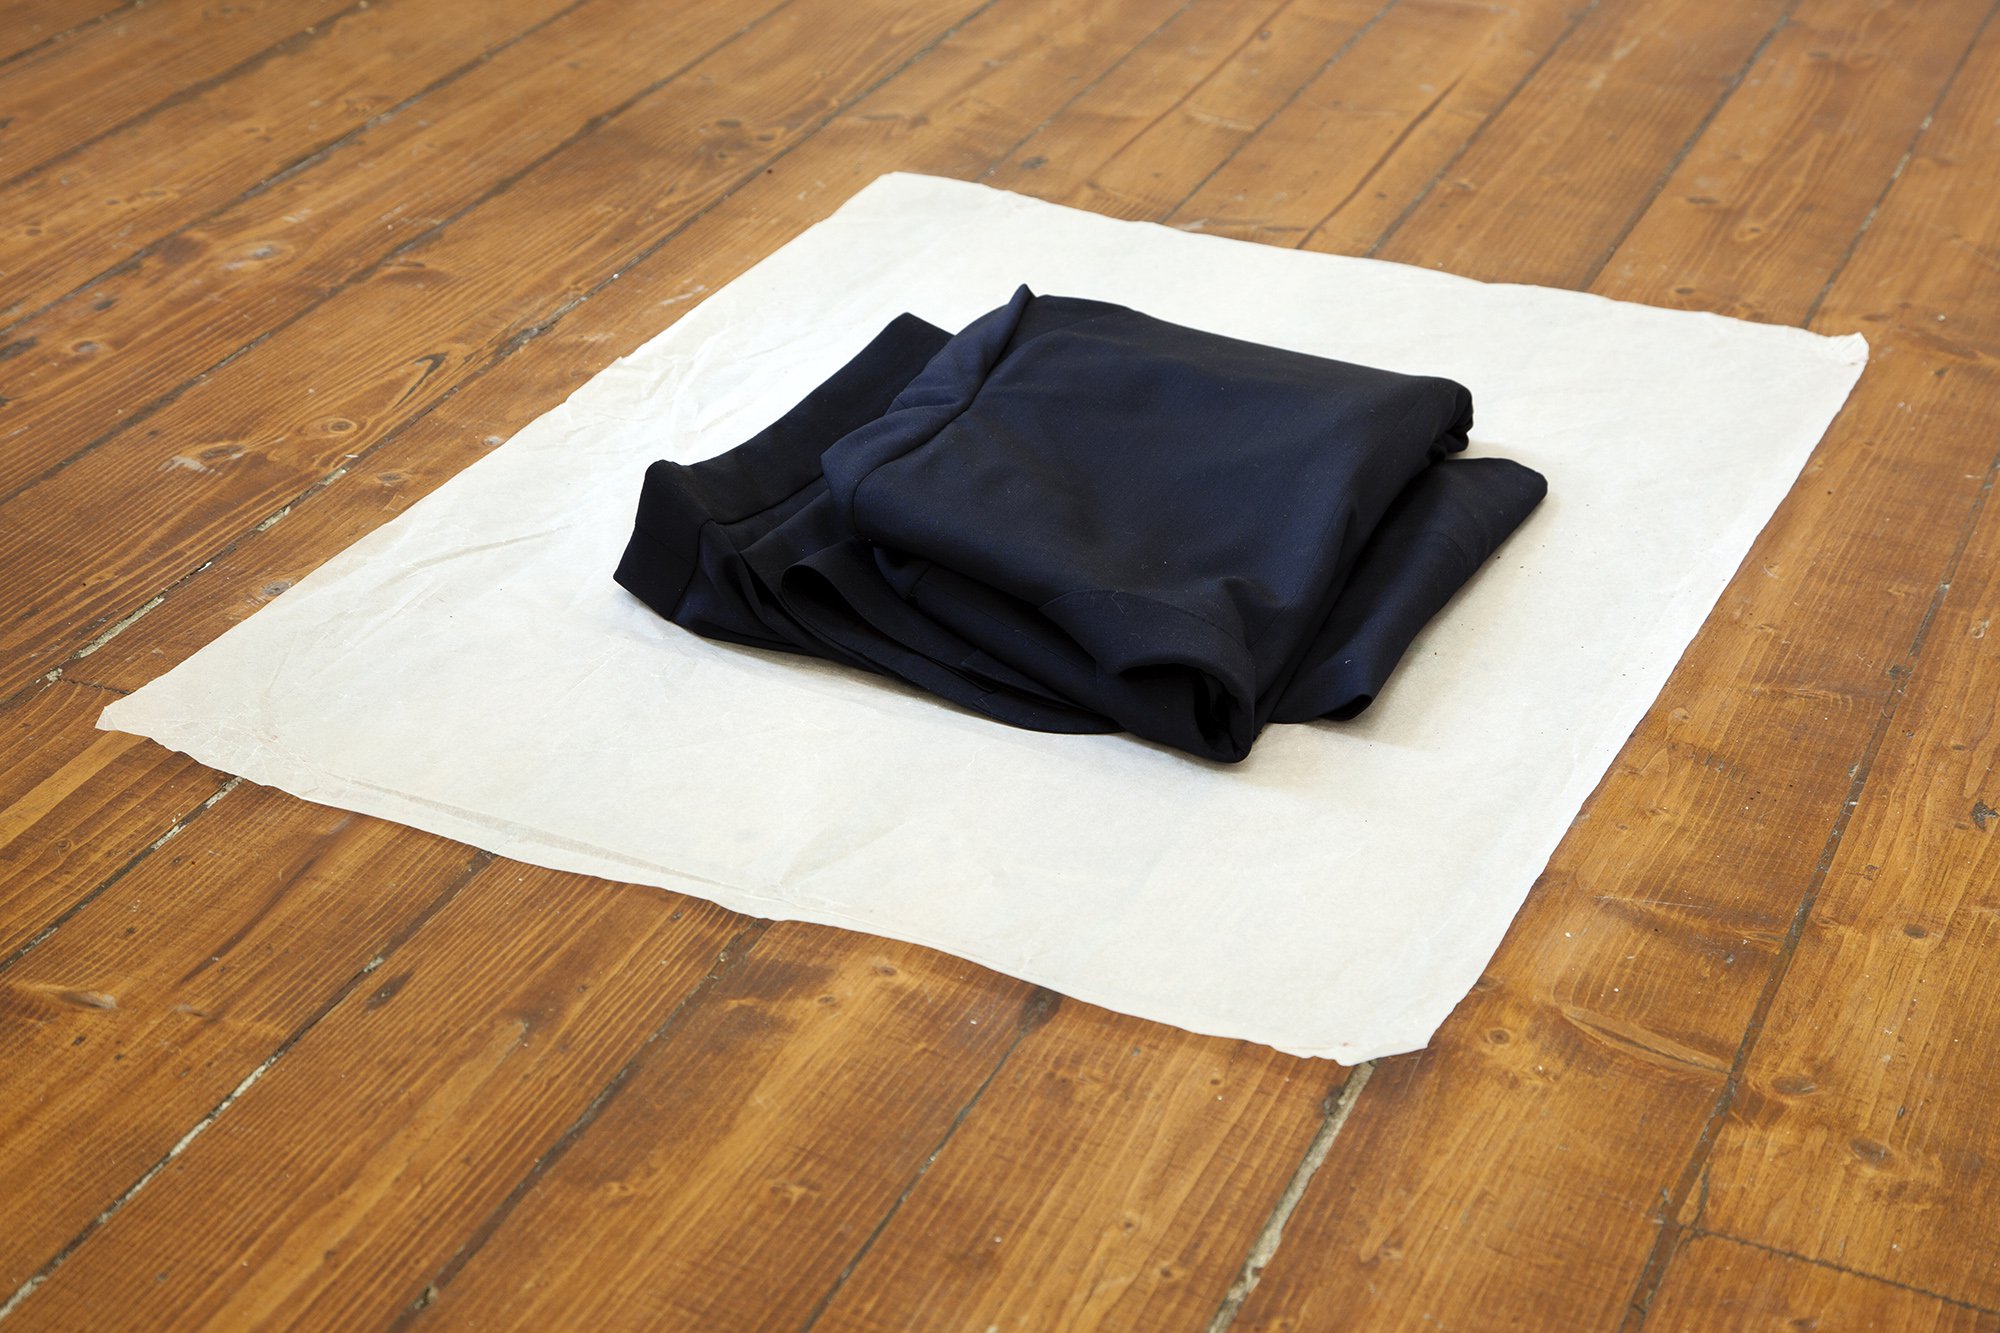 Christodoulos Panayiotou, Suit, hand made suit, Amadeus Tropical, 8 ounce (240 gram) navy, plain wave fabric in 100% wool, paper, dimensions variable, 2012. Installation view, Tenuto, Rodeo, Istanbul, 2012 – 2013